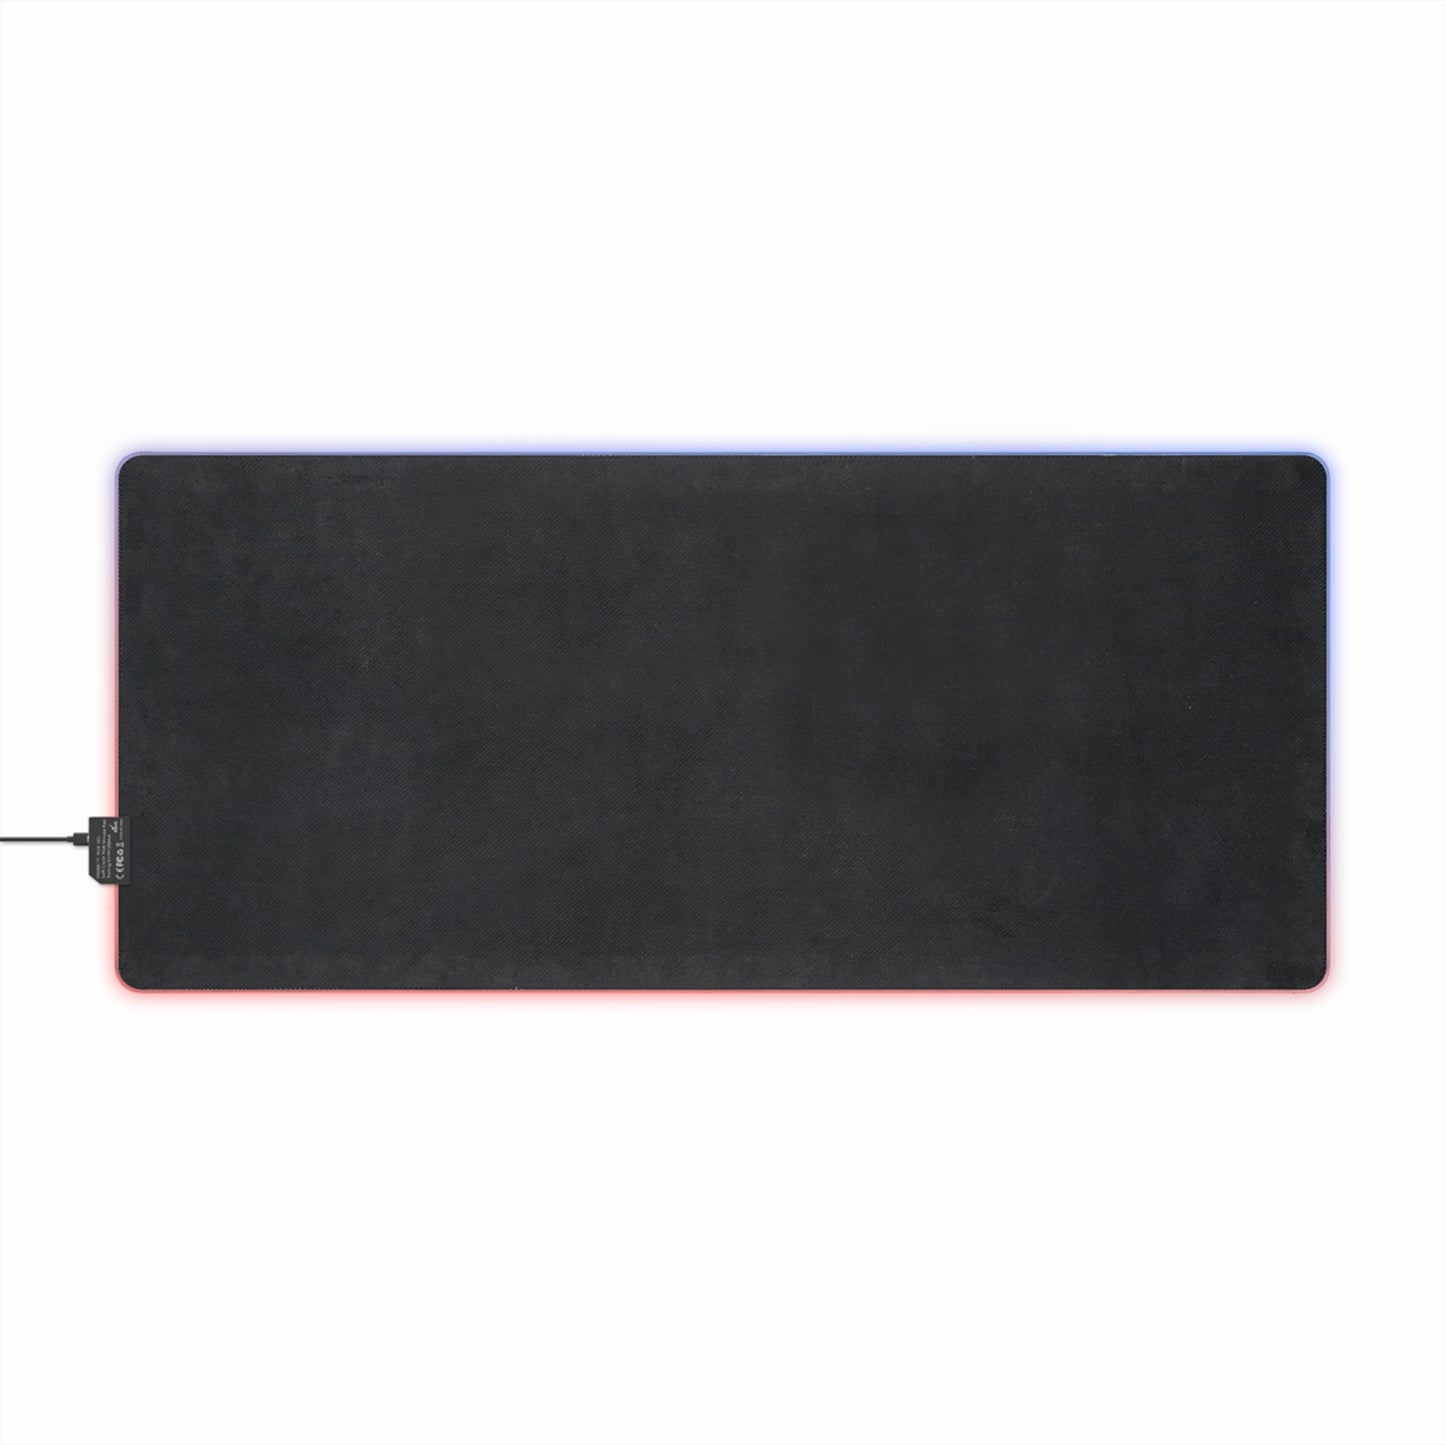 CLMP-6 LED Gaming Mouse Pad